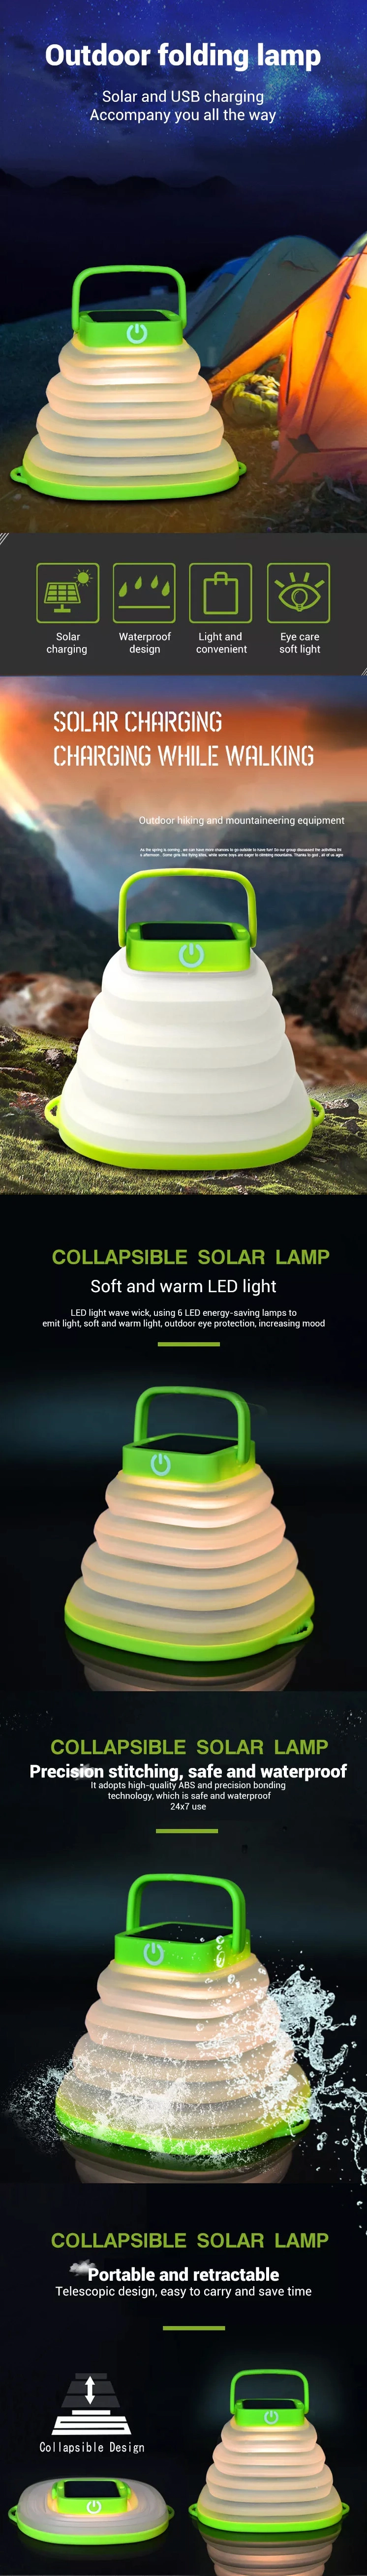 Outdoor Portable Folding Camping Tent Lamp Solar Energy Hanging Multiple Power Supply Lantern